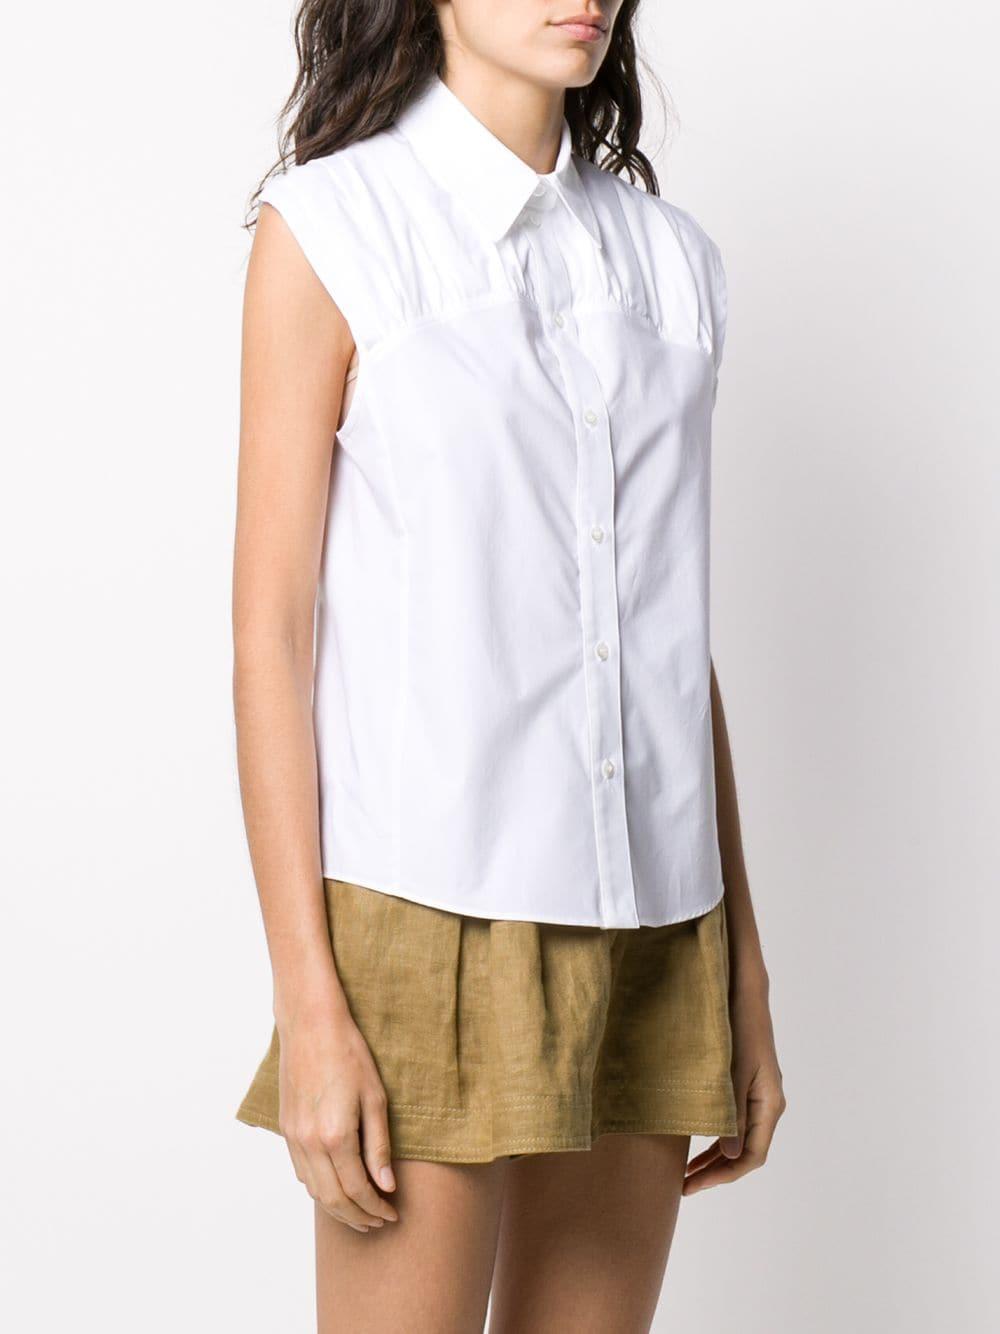 See By Chloé Cotton Buttoned Sleeveless Shirt in White - Lyst